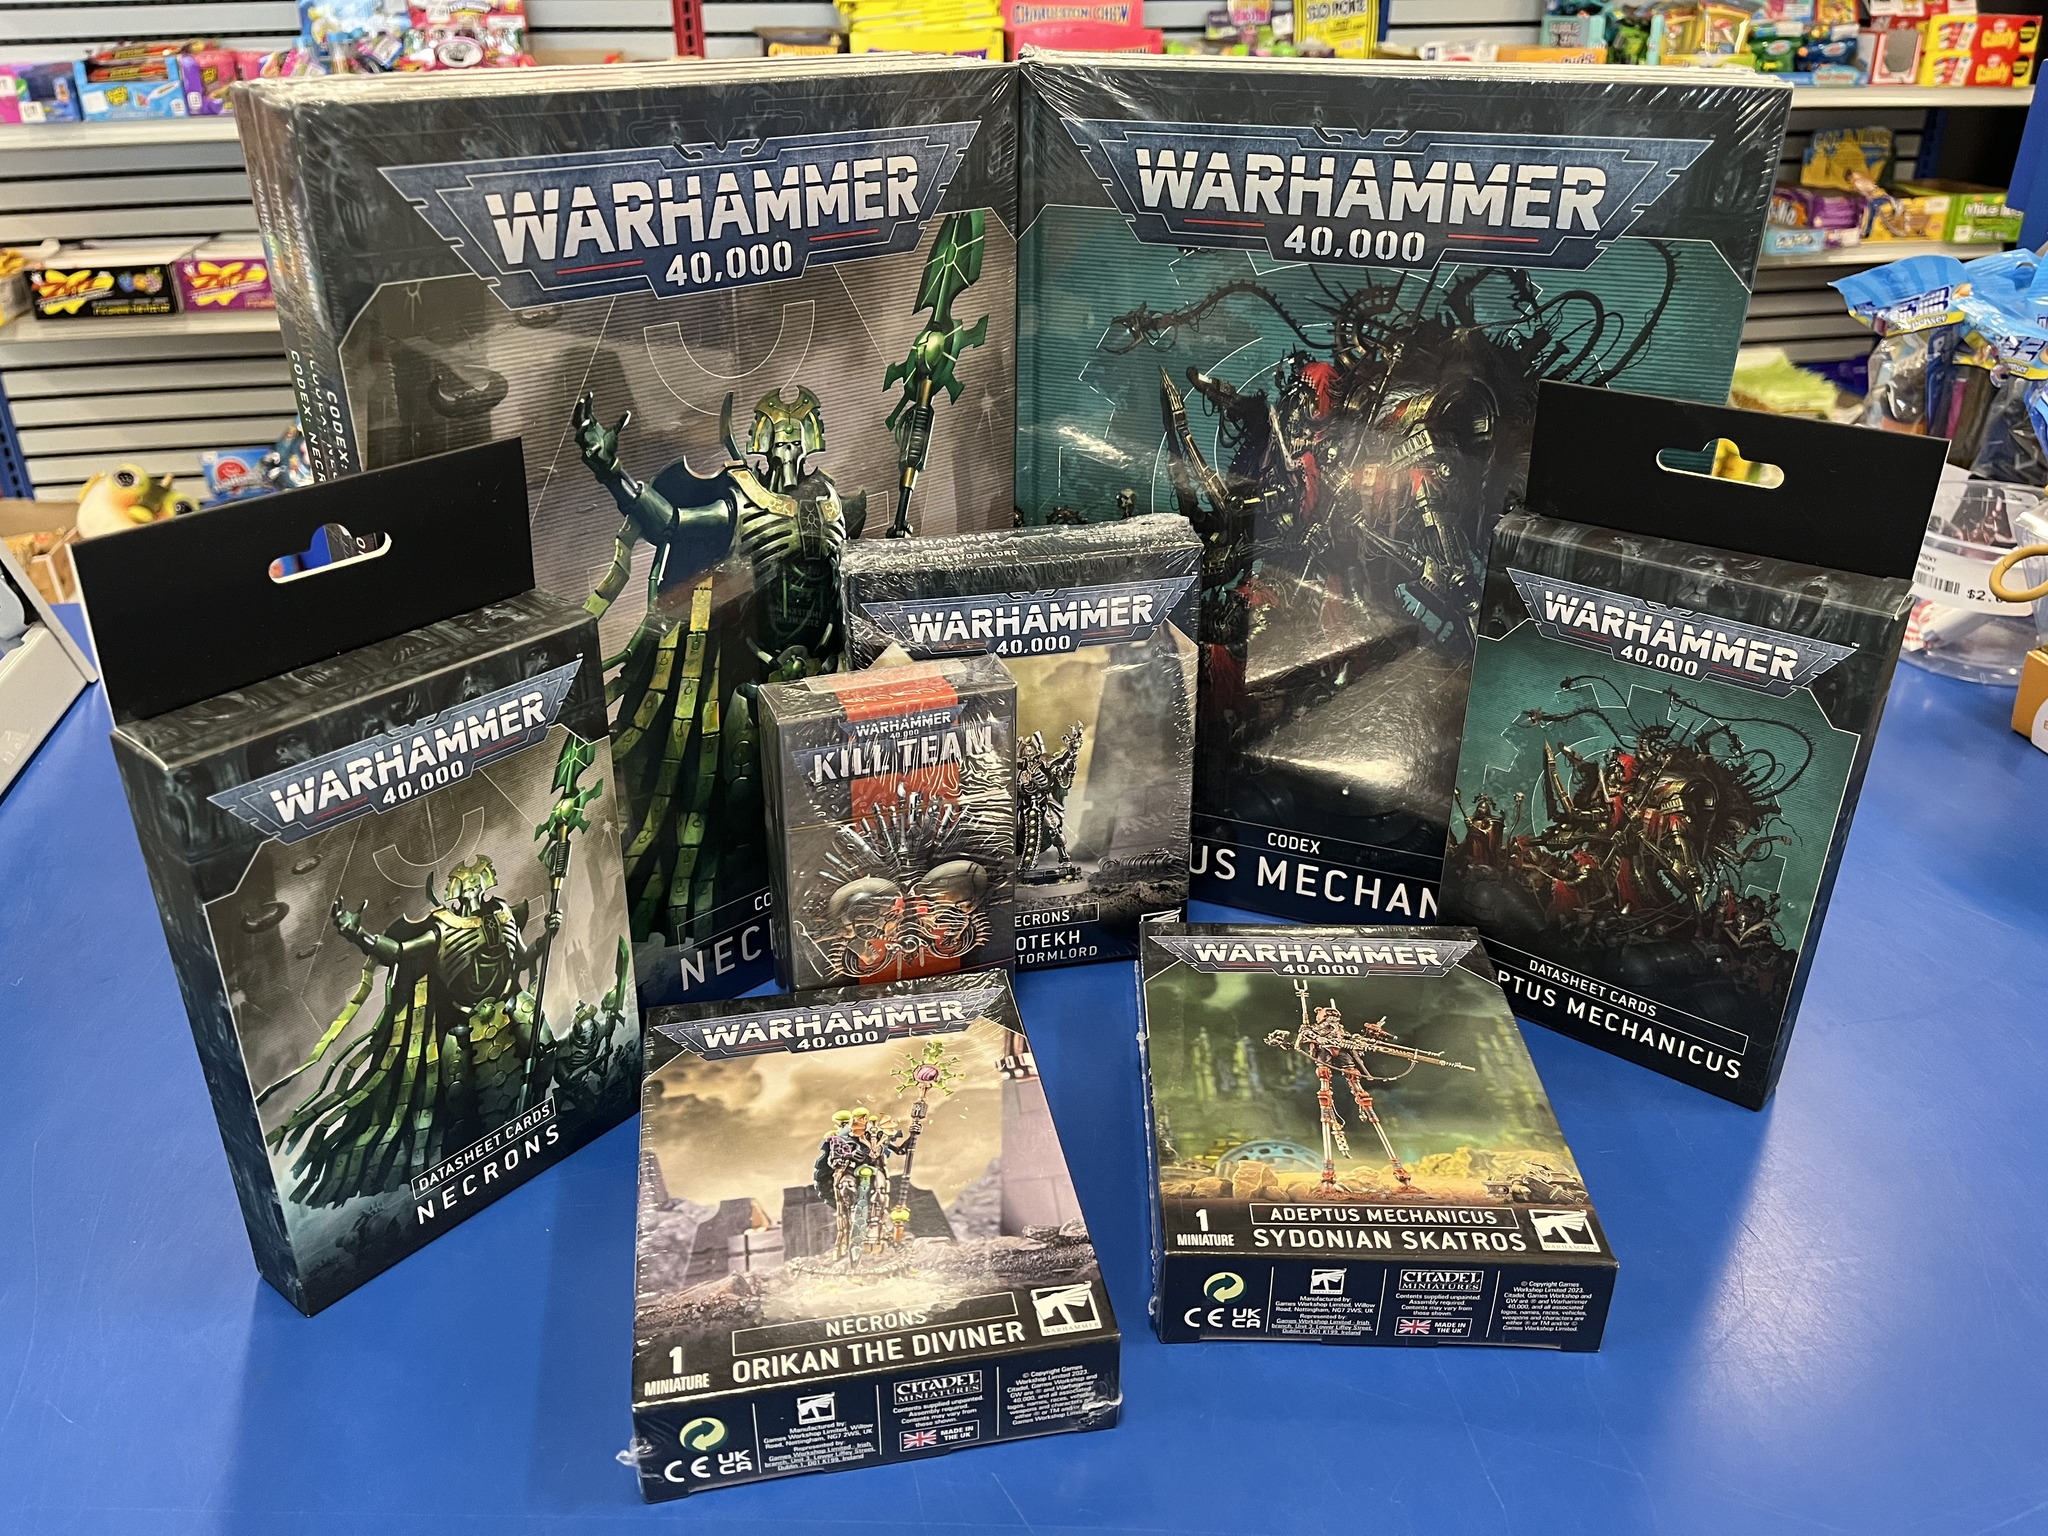 New-Warhammer-releases image